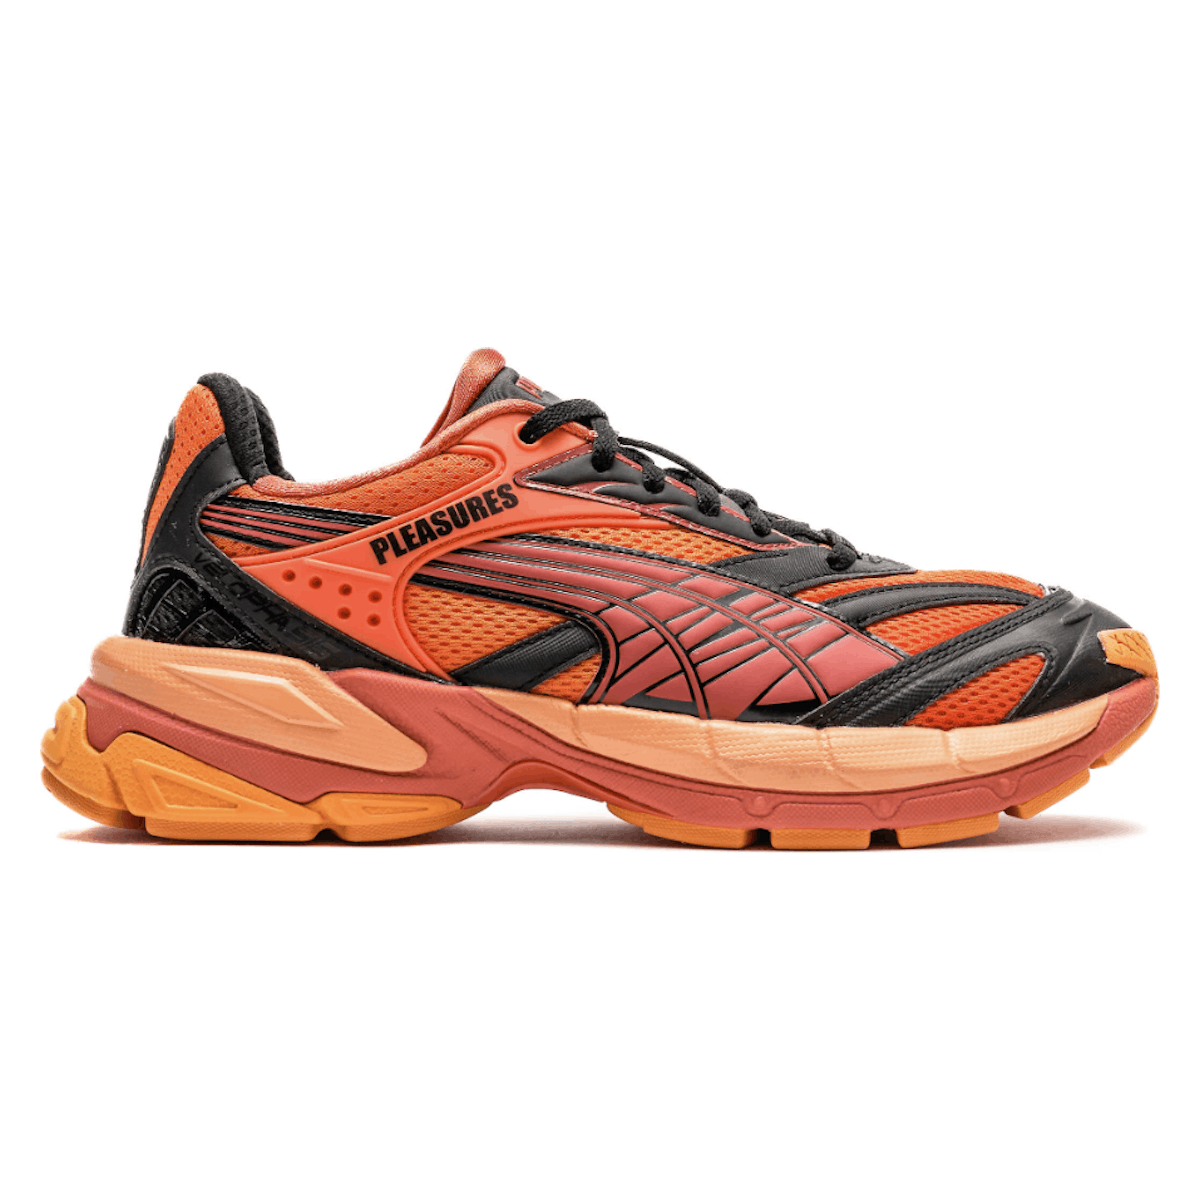 Pleasures x Puma Velophasis Layers "Cayenne Pepper"